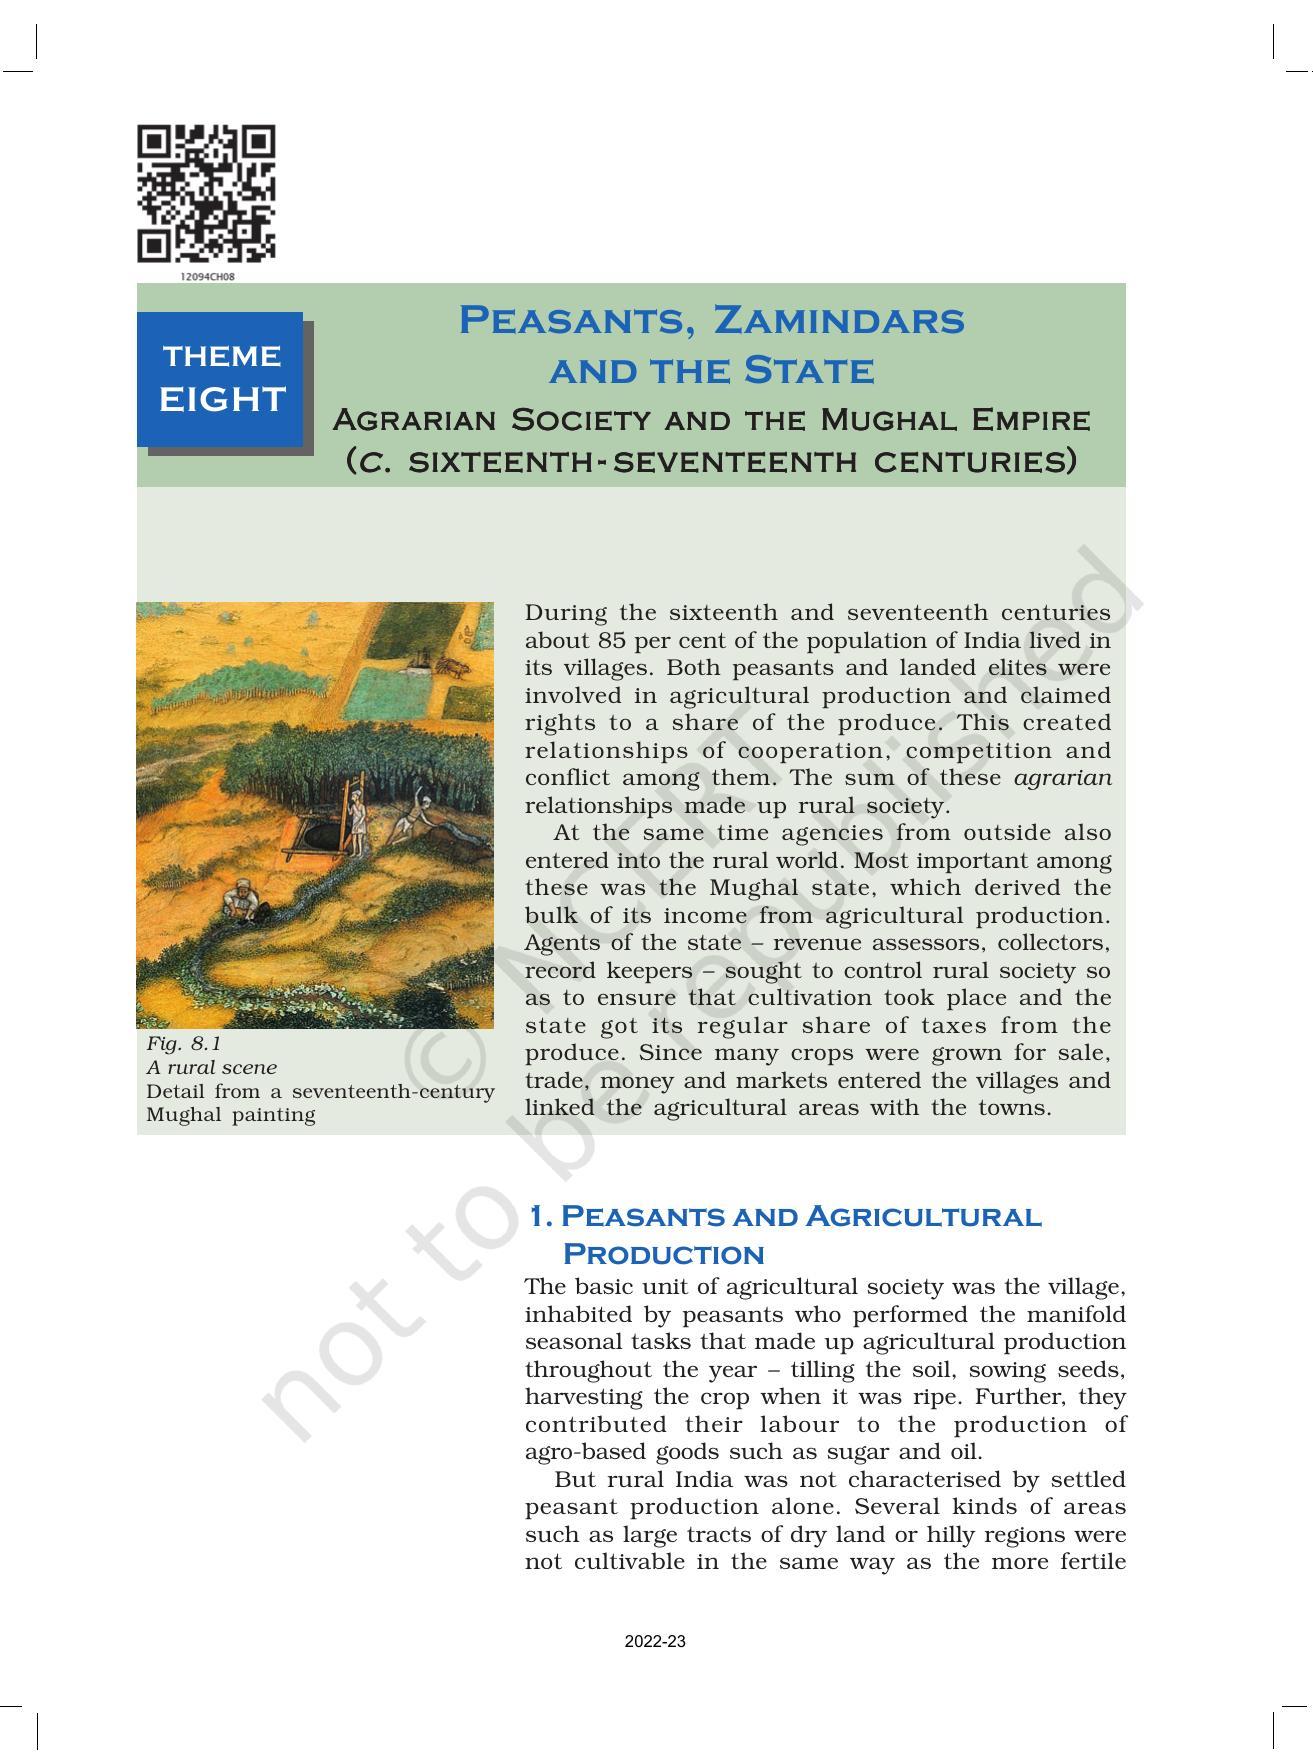 NCERT Book for Class 12 History (Part-II) Chapter 8 Peasants, Zamindars, and the State - Page 1